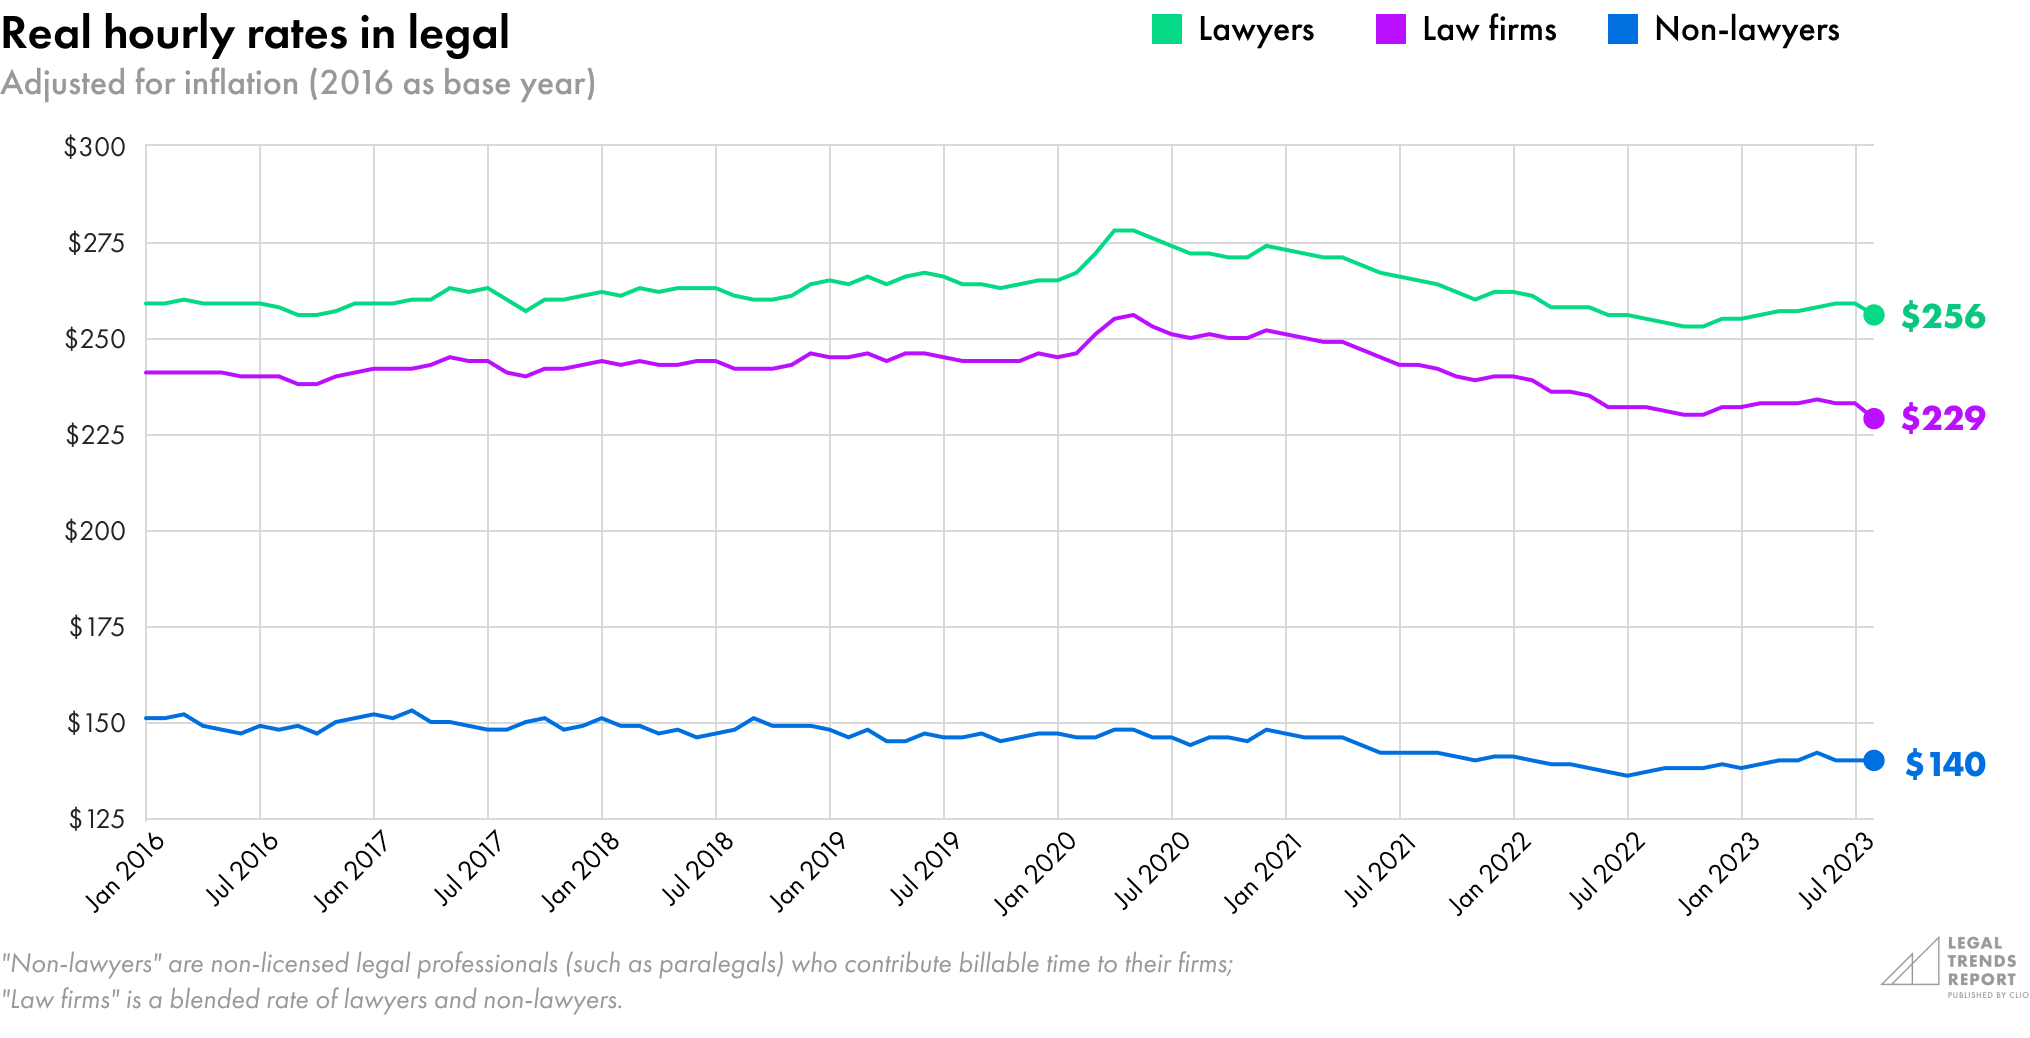 Real hourly rates in legal